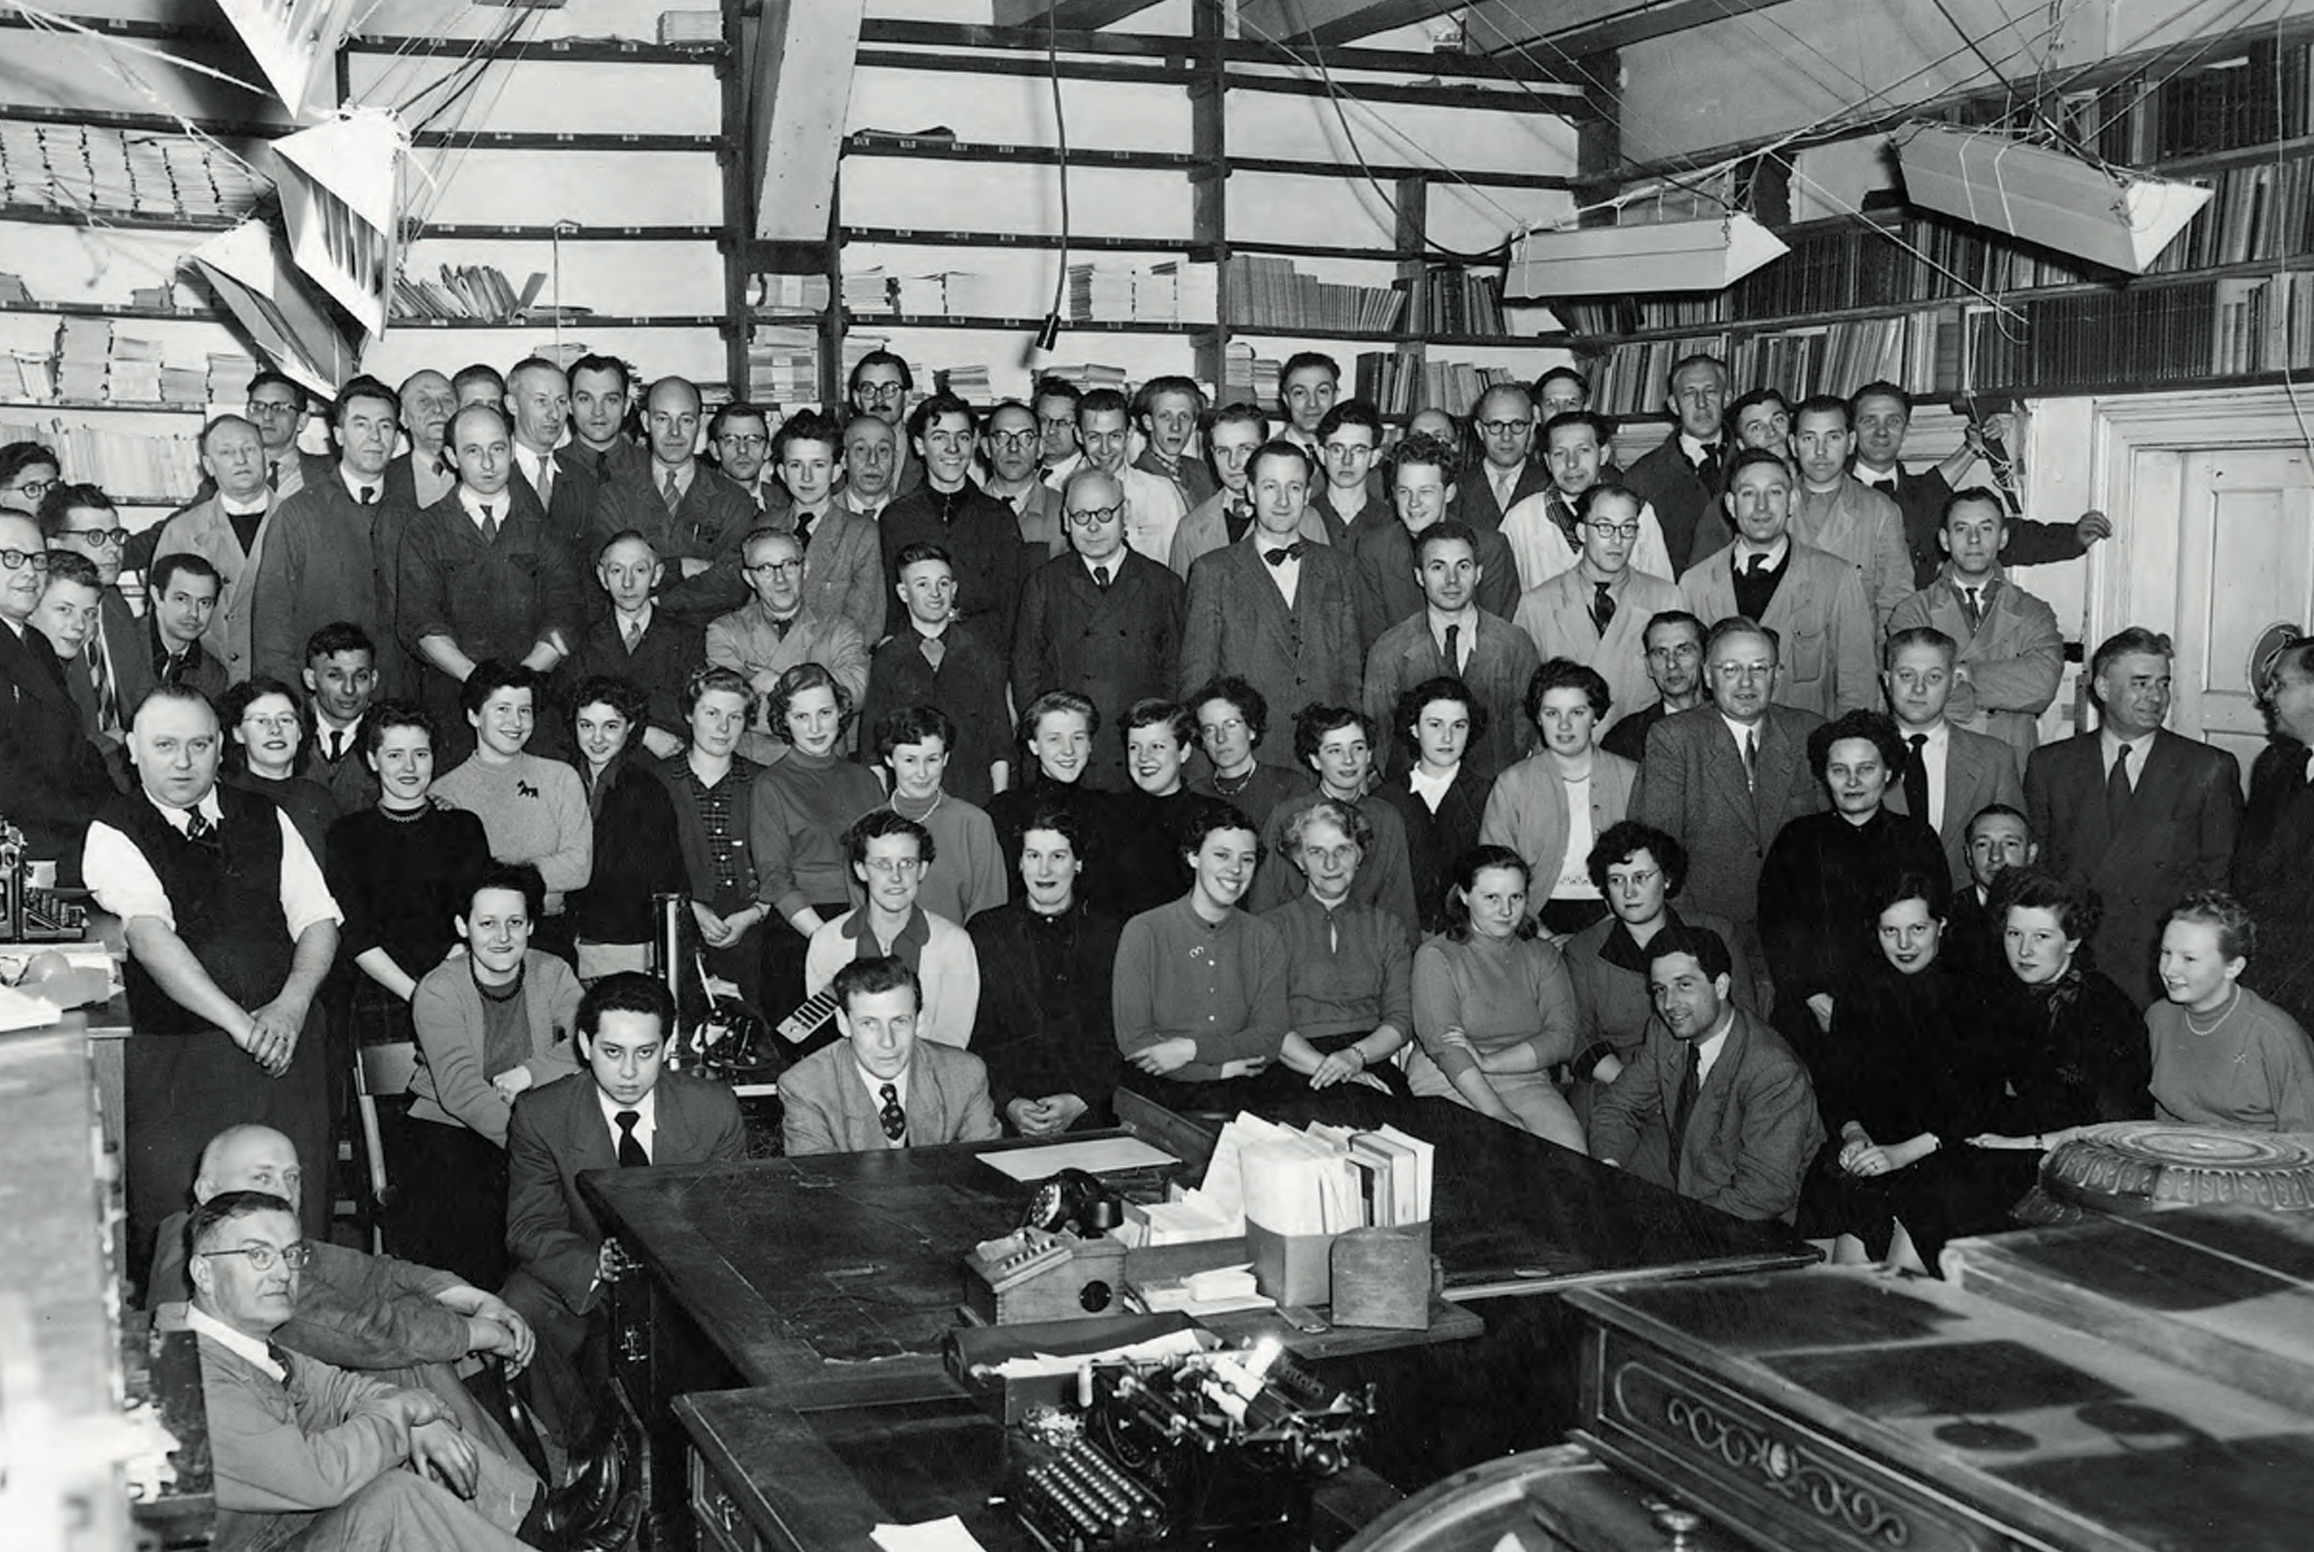 Black and white photograph of about ninety people posing for a picture with the women sitting in the foreground